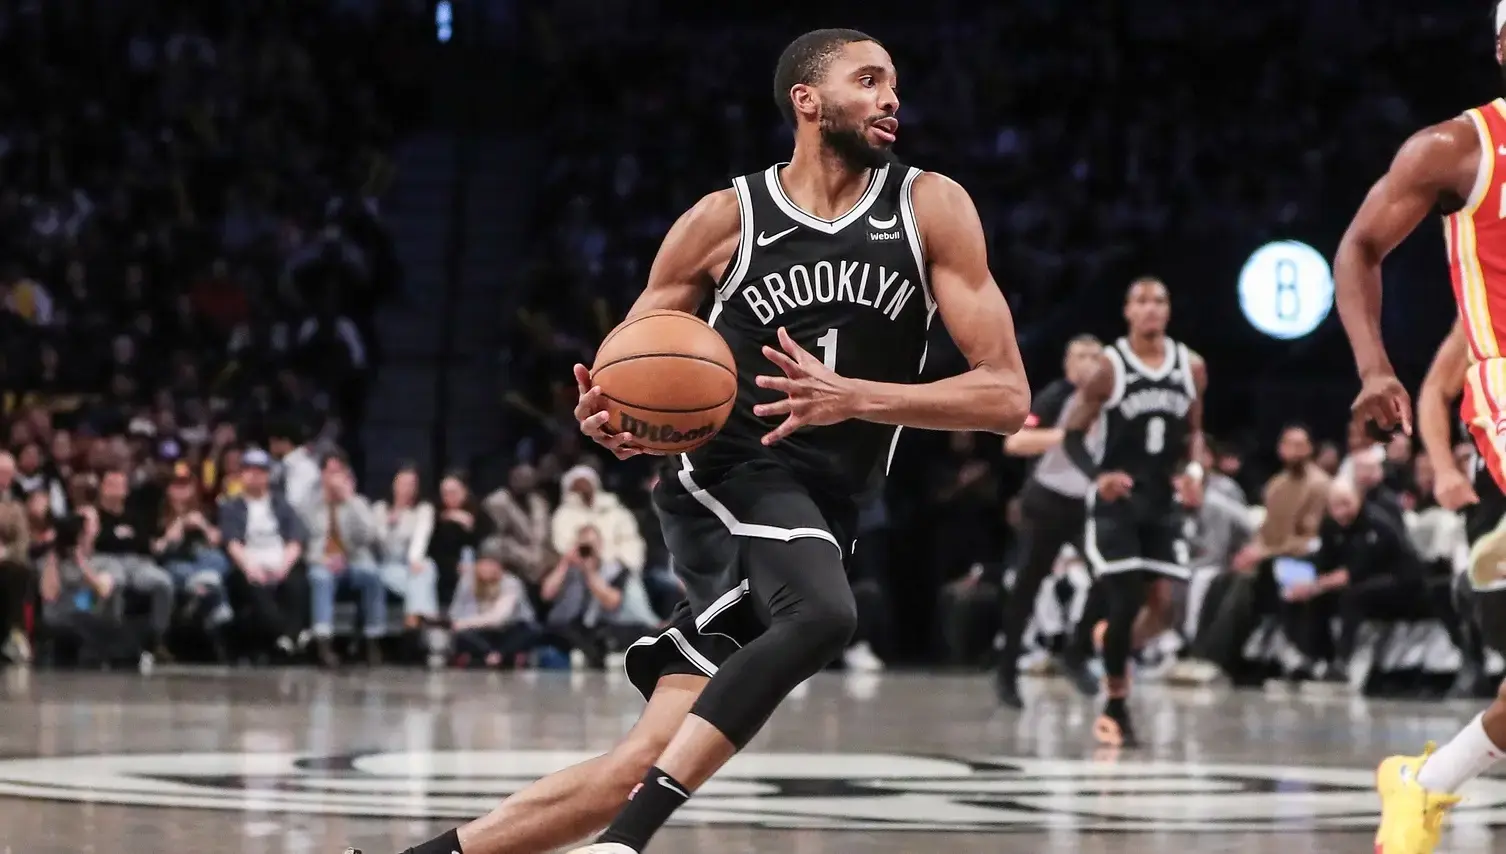 Brooklyn Nets forward Mikal Bridges (1) drives to the basket in the third quarter against the Atlanta Hawks at Barclays Center. / Wendell Cruz-USA TODAY Sports